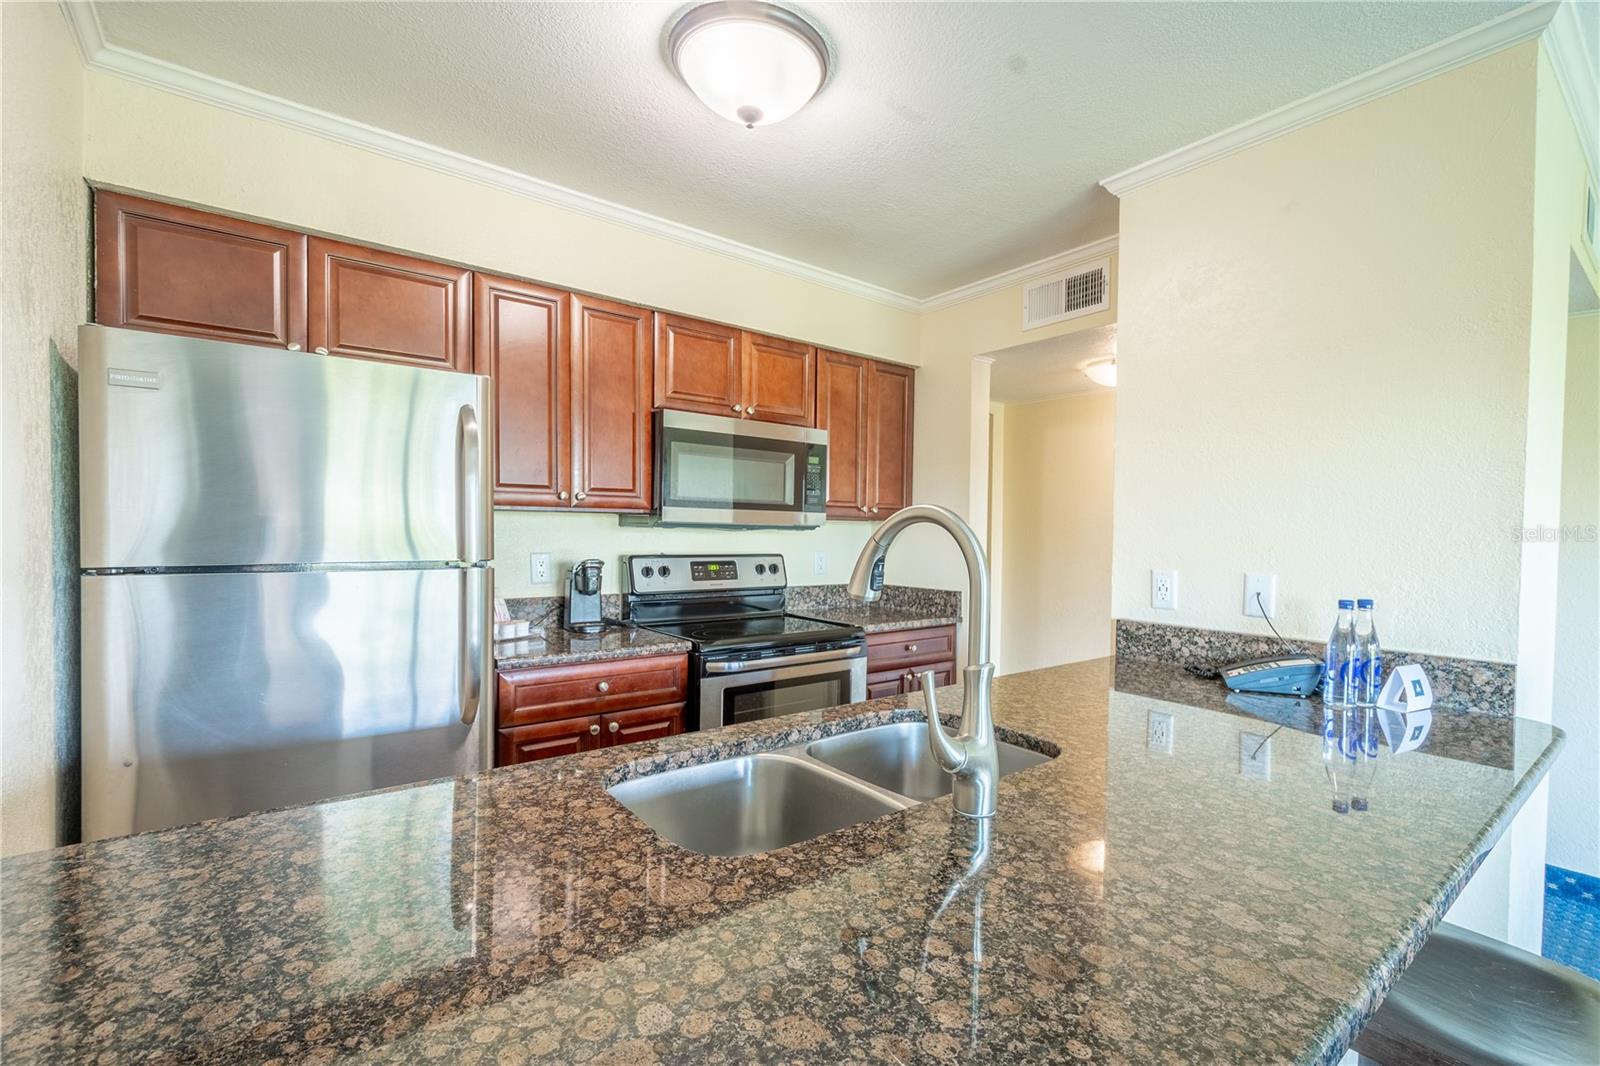 The kitchen features granite counters, and a suite of stainless steel appliances